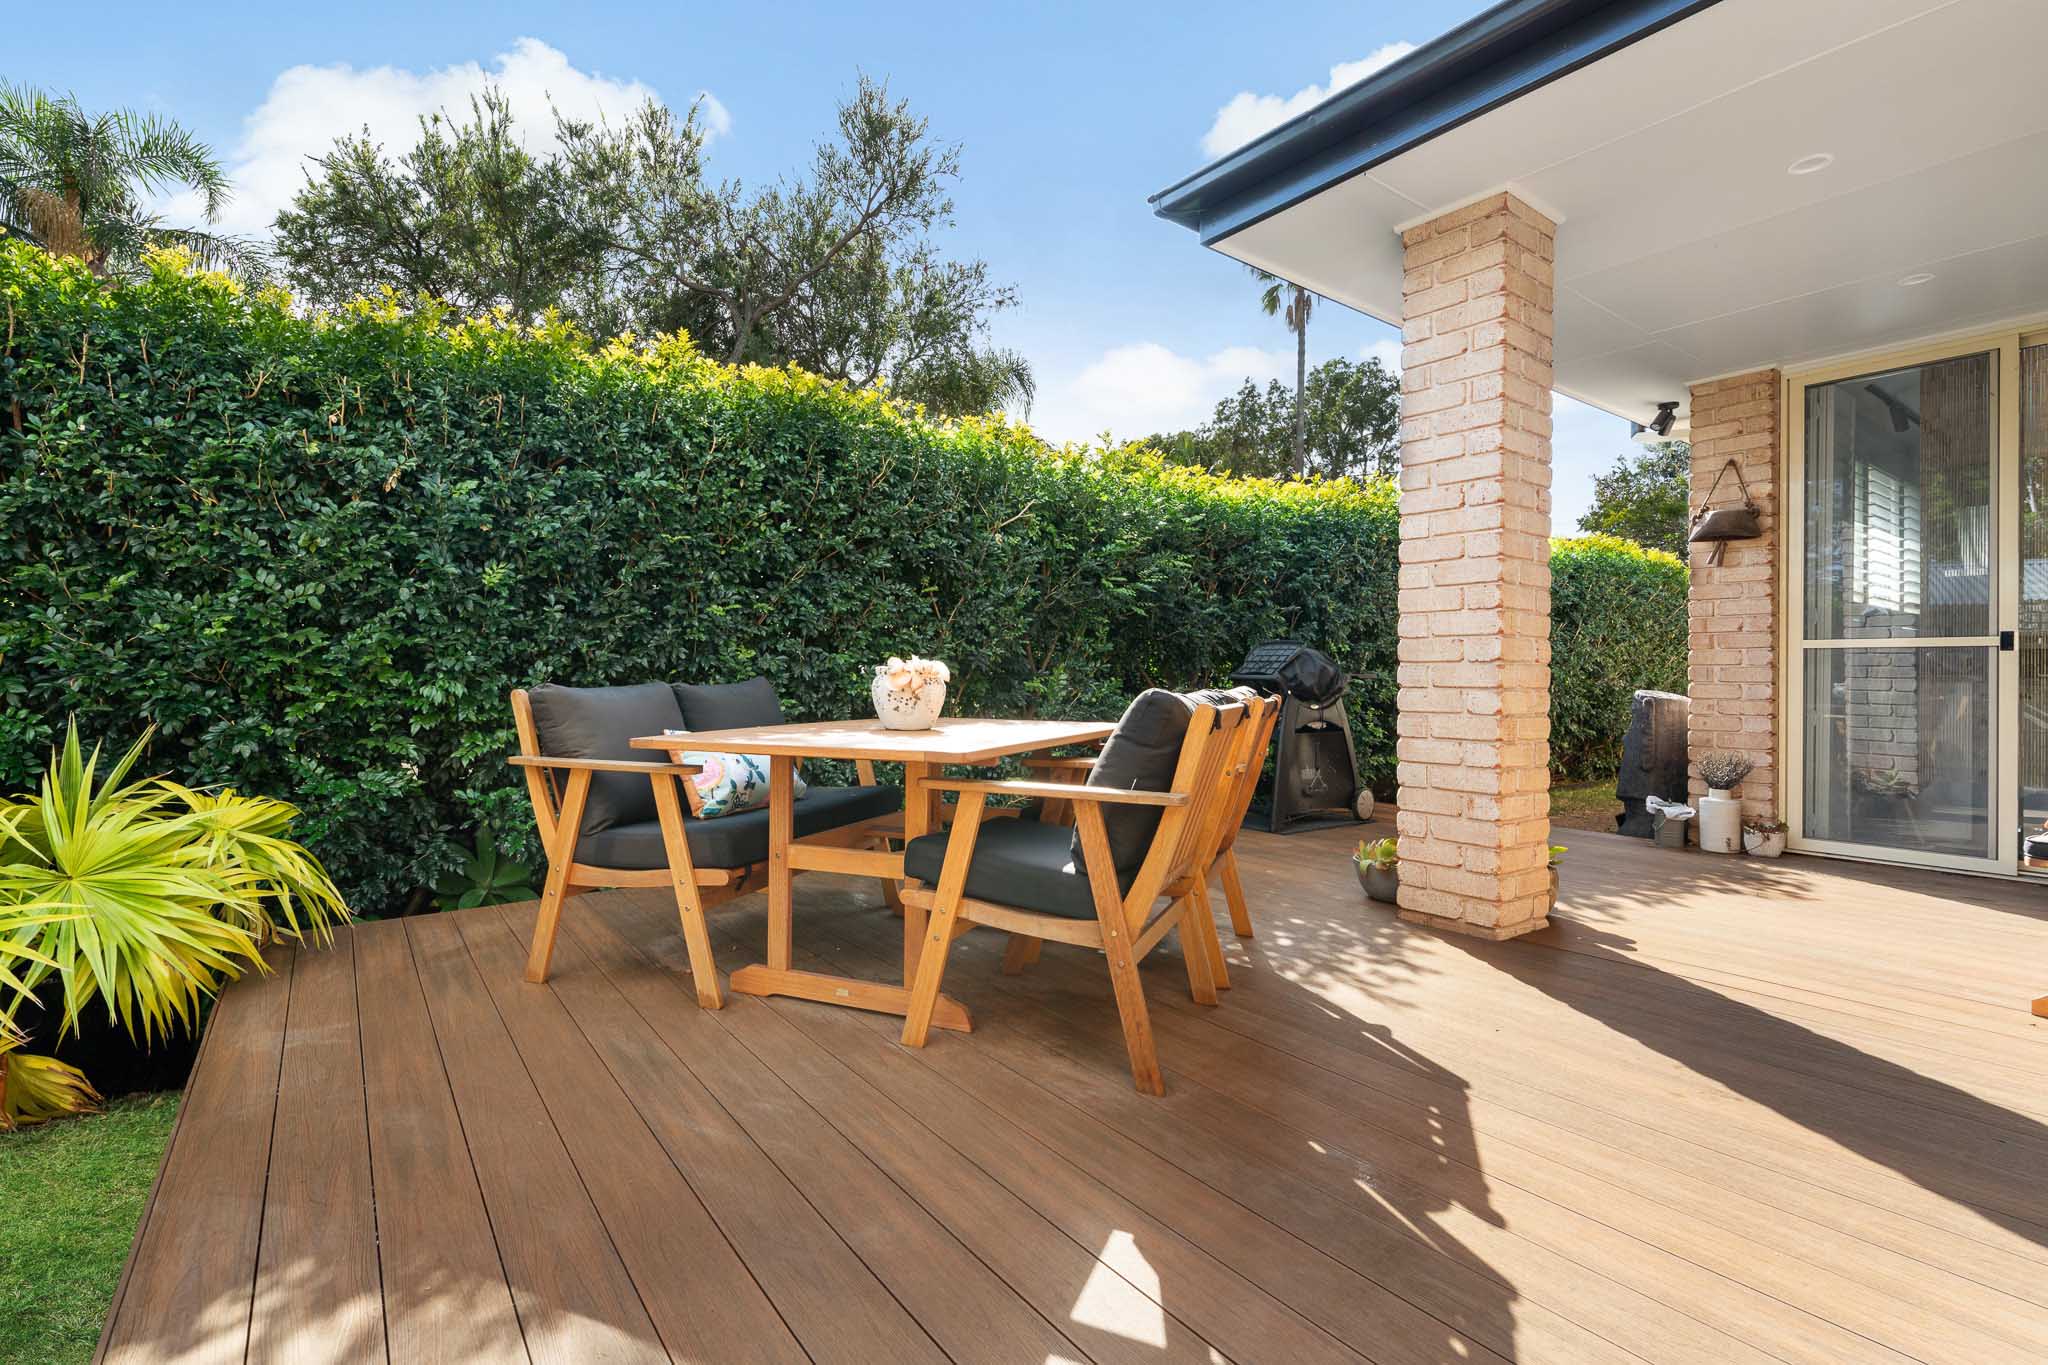 Teak composite decking boards with a small table and chairs on top of them